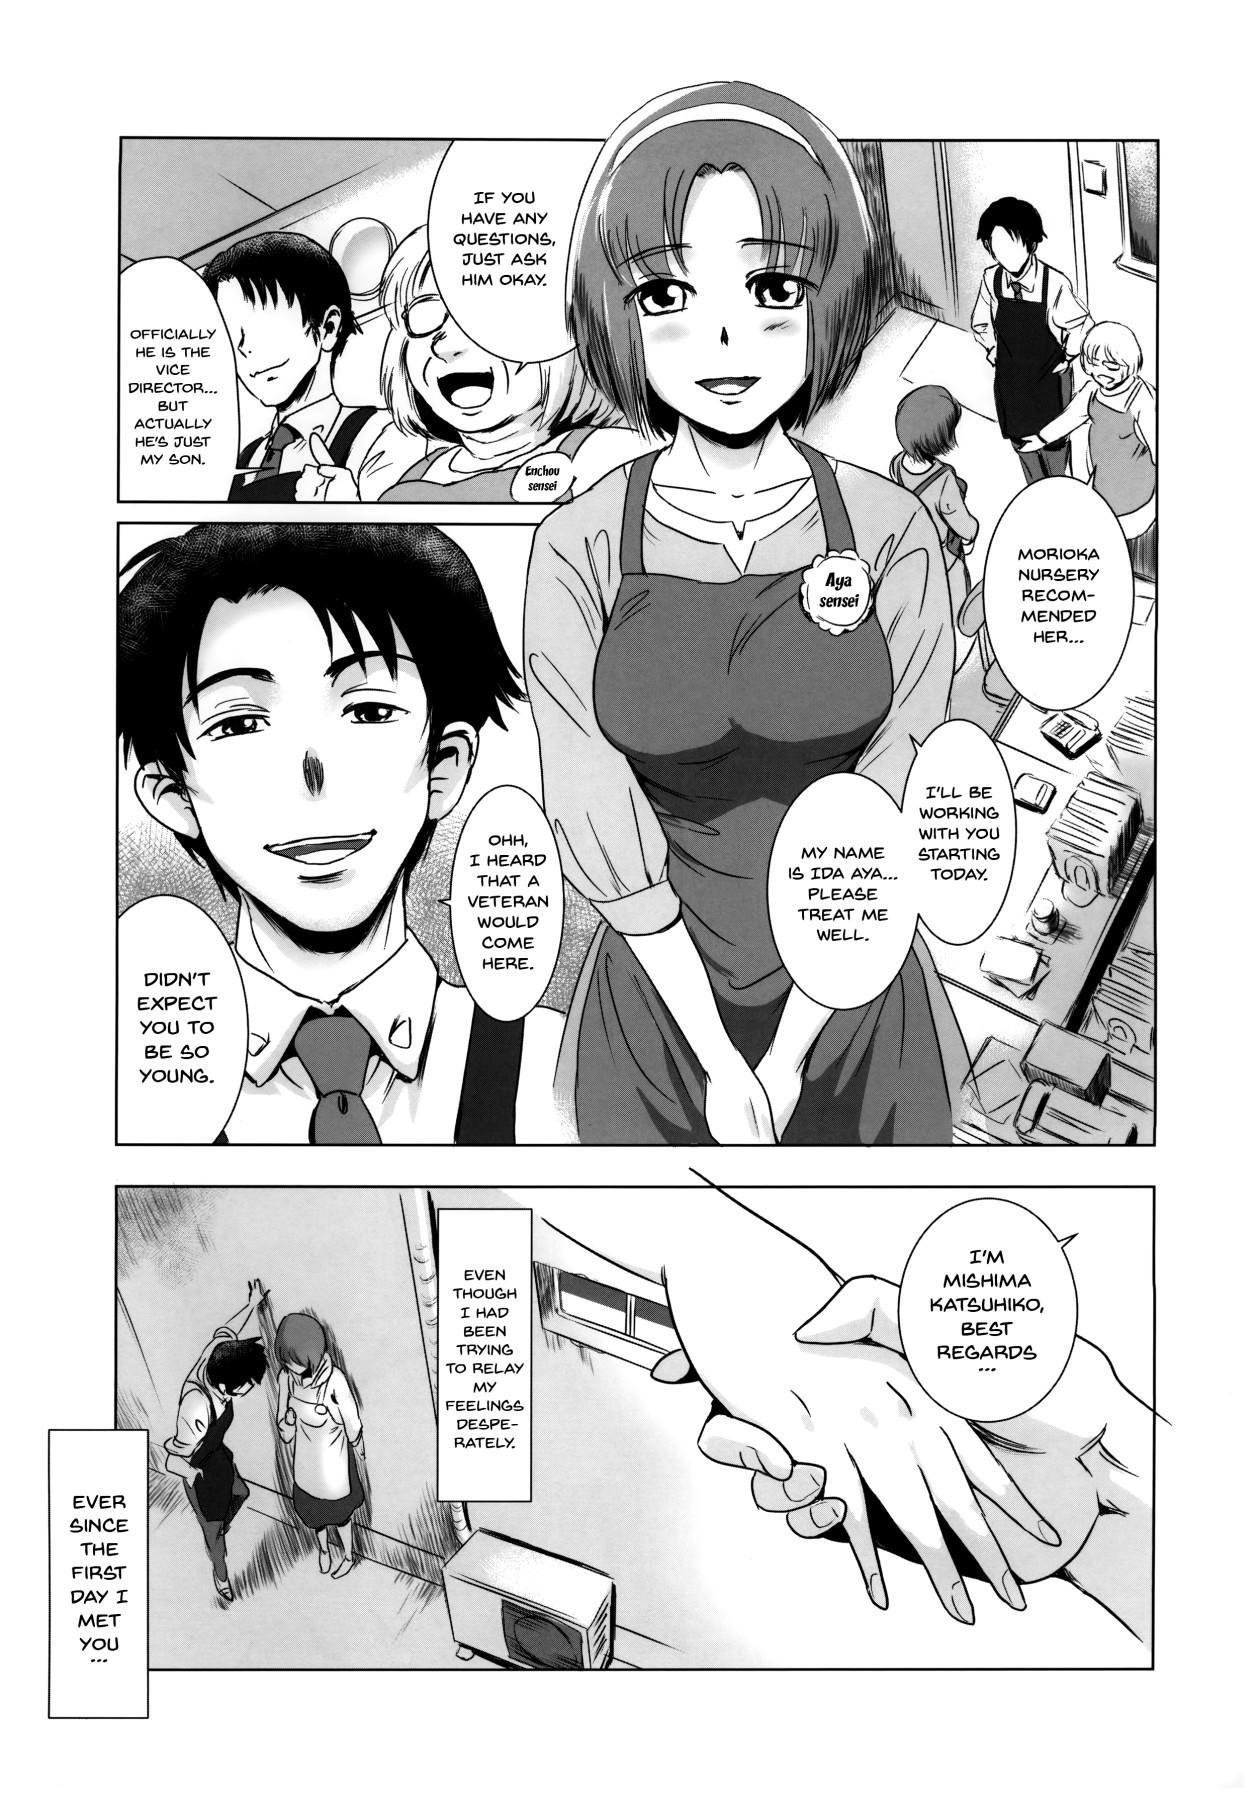 Czech Story of the 'N' Situation - Situation#1 Kyouhaku - Original Tiny - Page 8